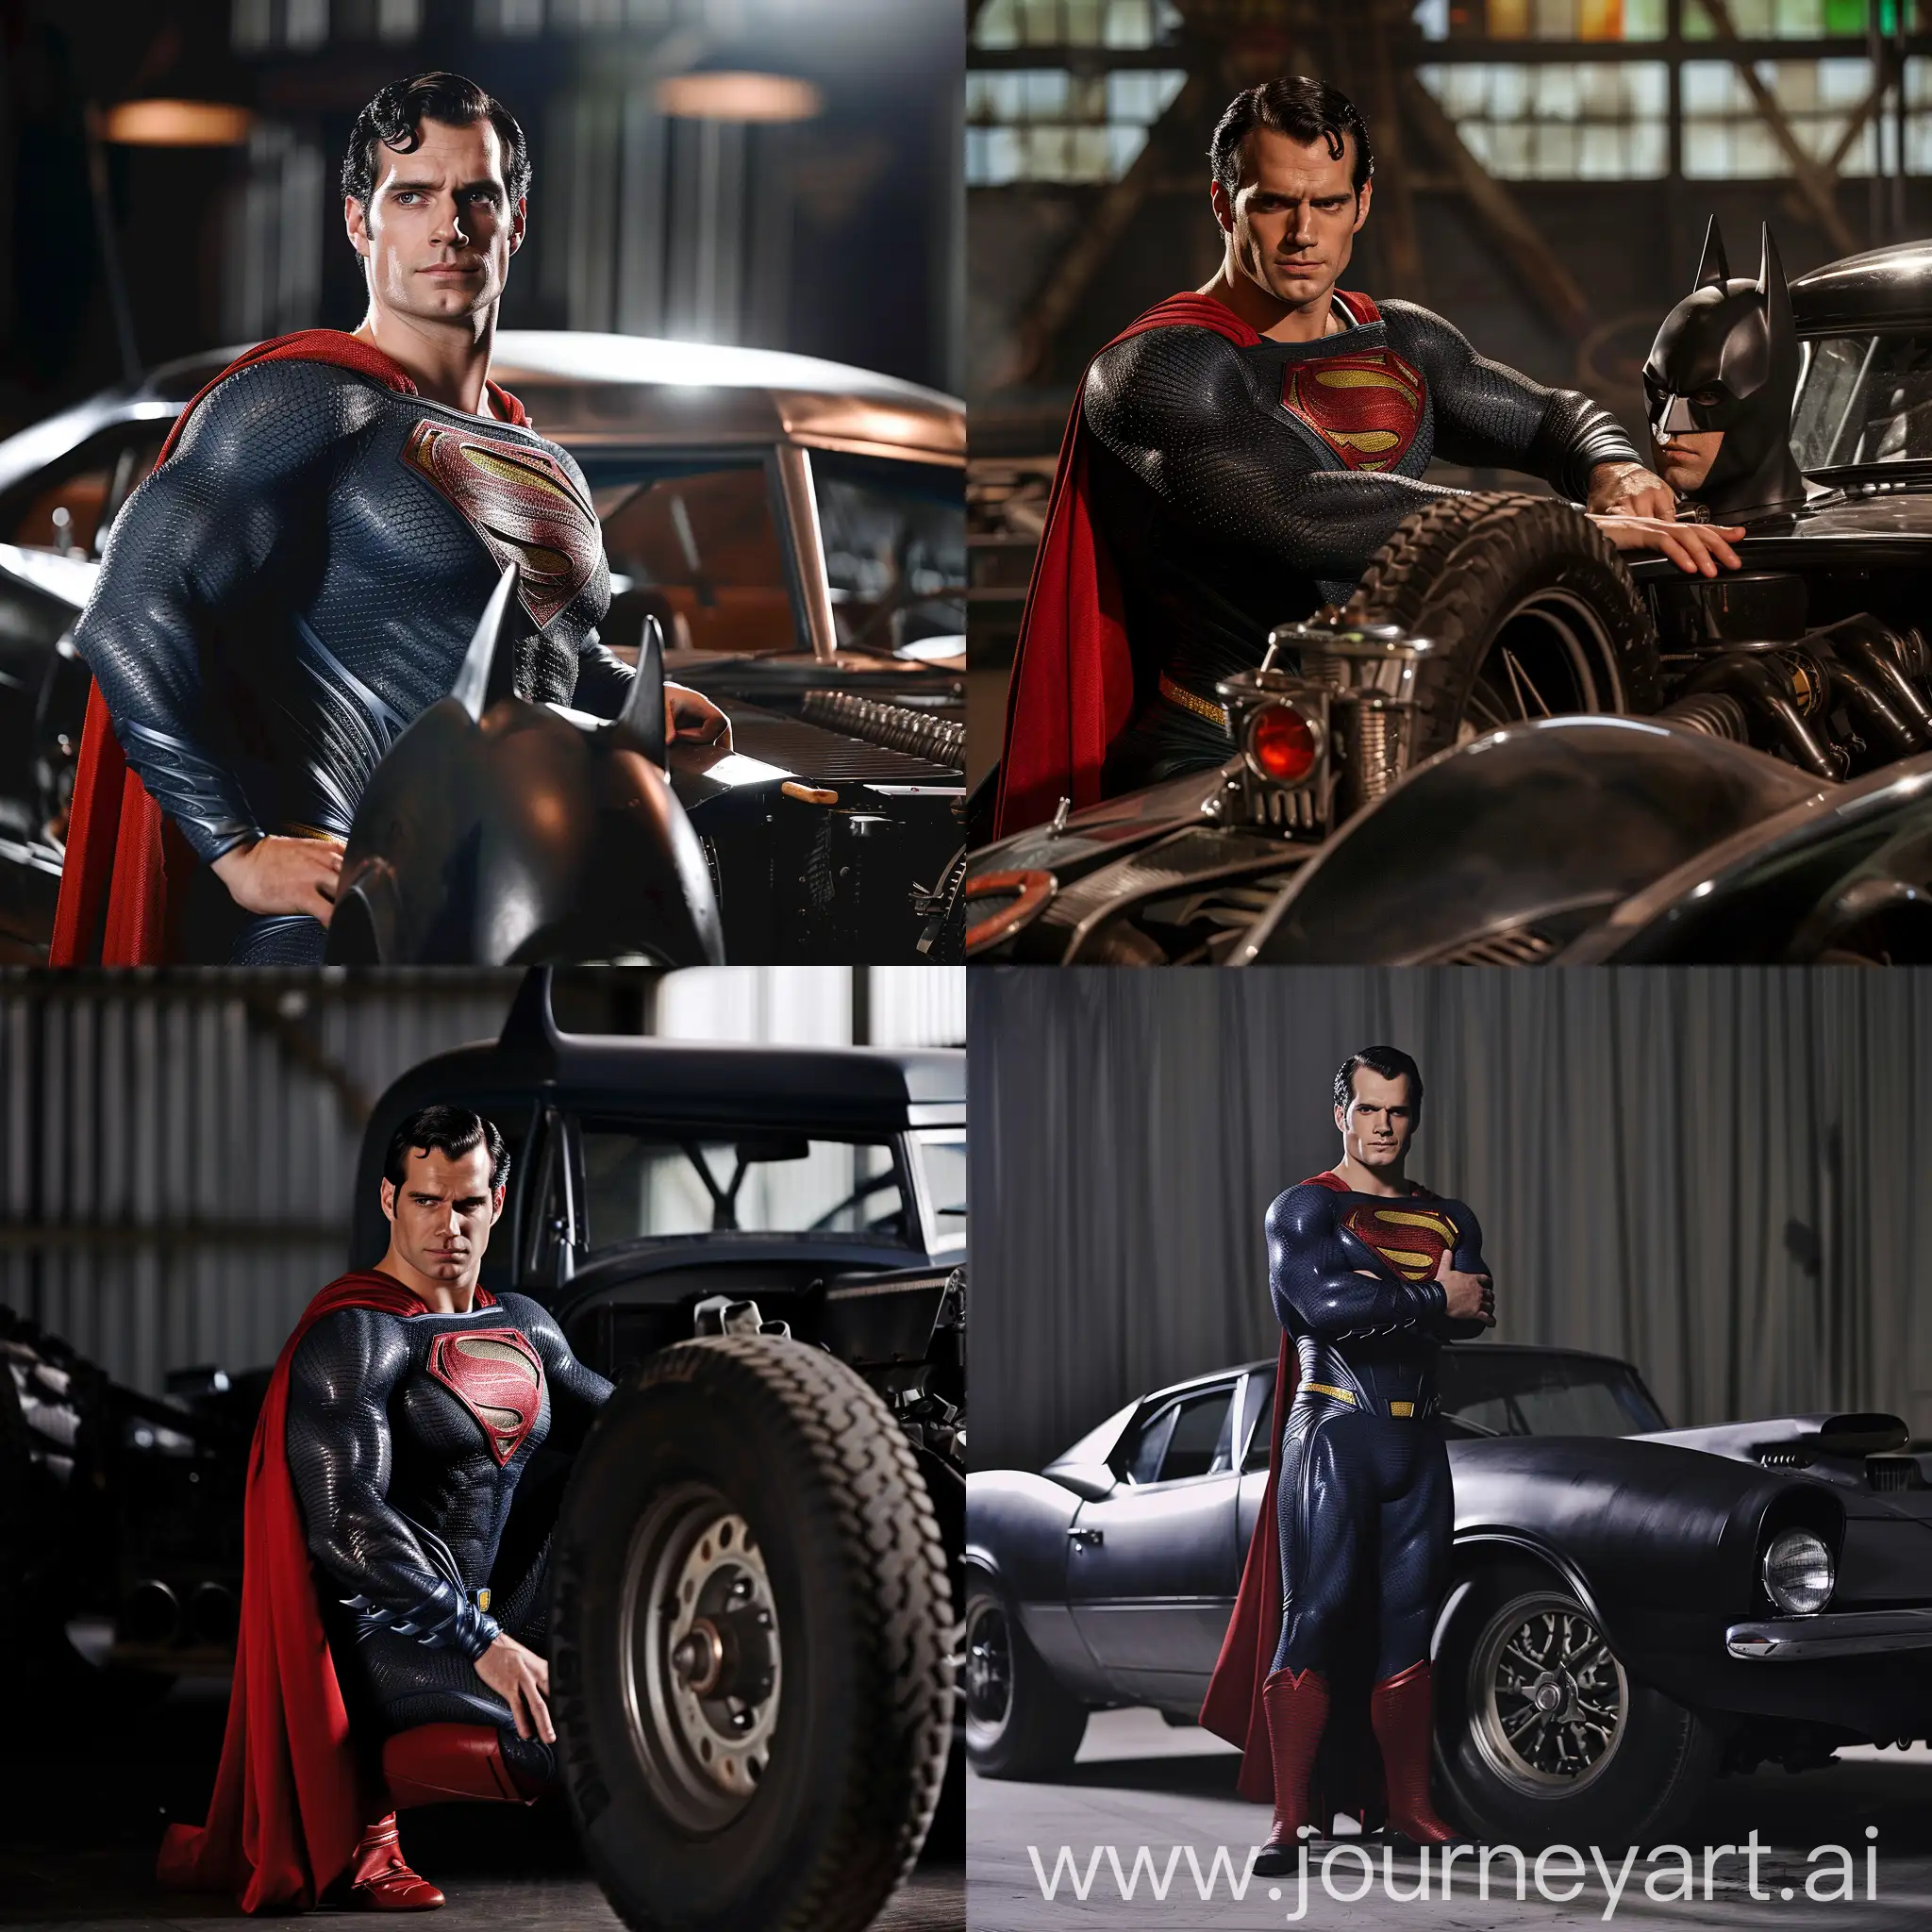 Superman in a car auction bidding on the batmobile